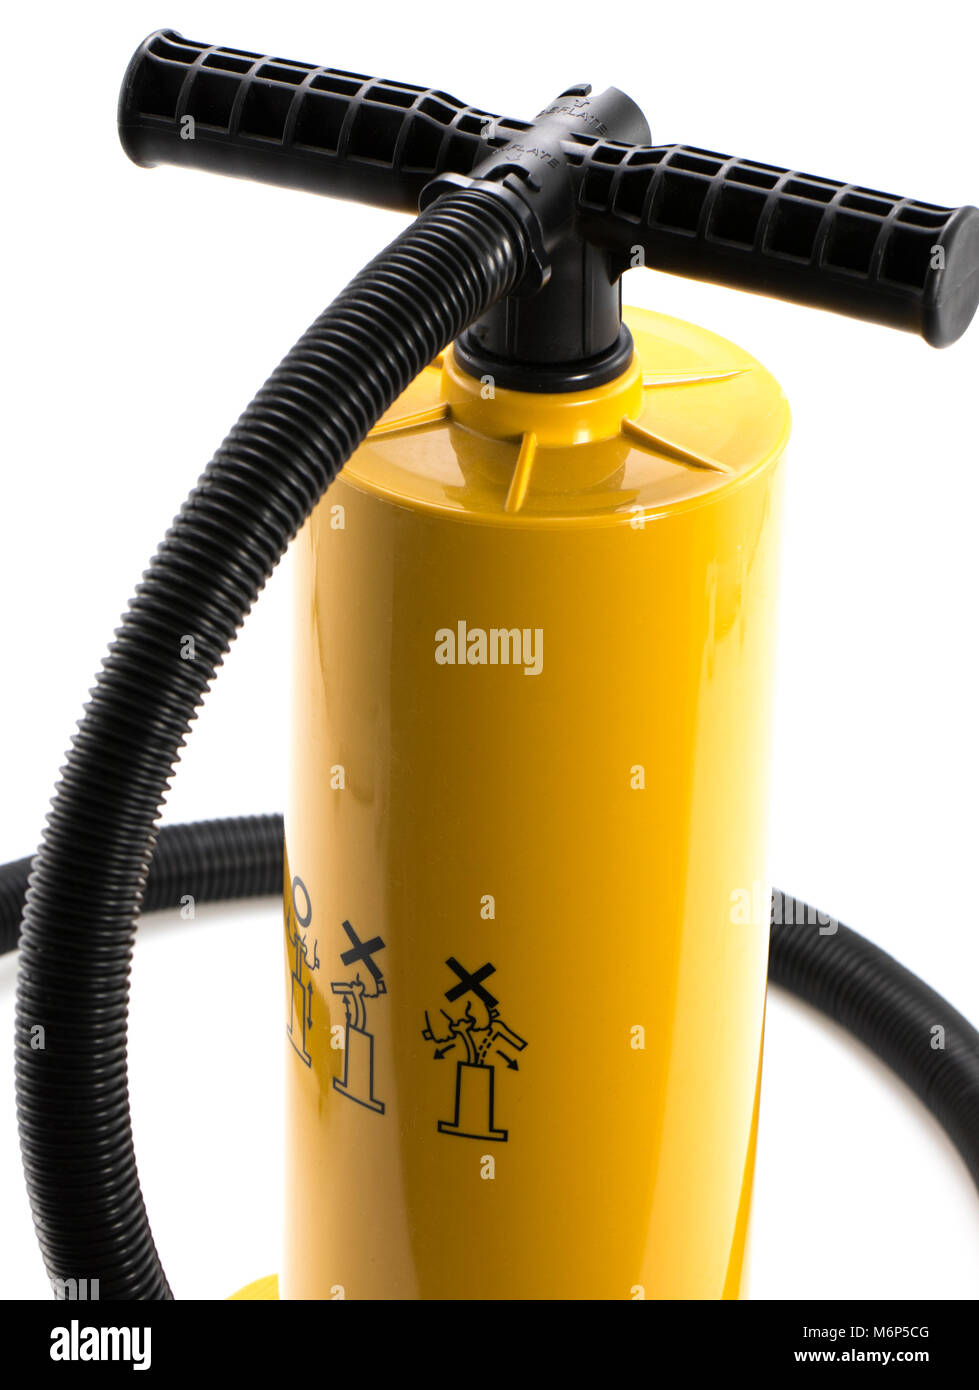 Manual air pump for inflating airbeds, beach balls etc Stock Photo